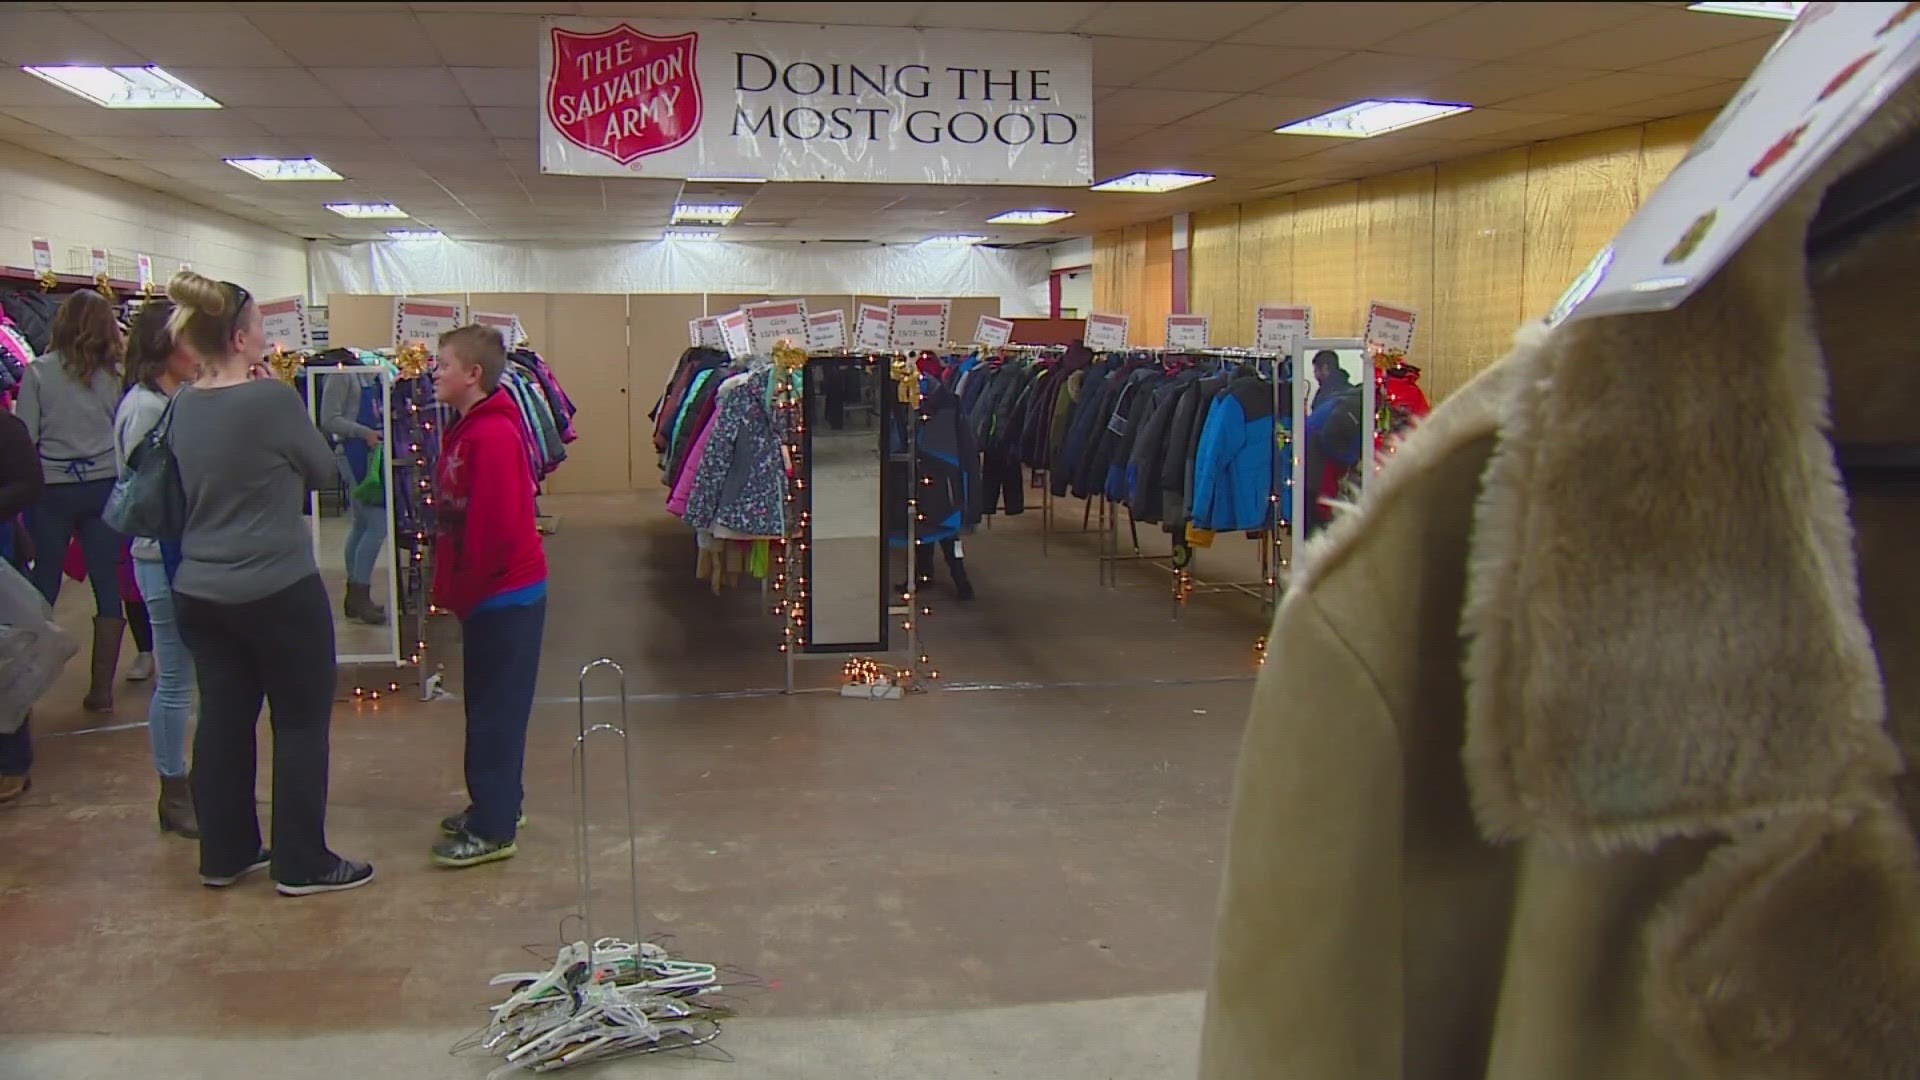 Visit local Fred Meyer's or CapEd Credit Unions to donate coats or money to families in need this winter season.